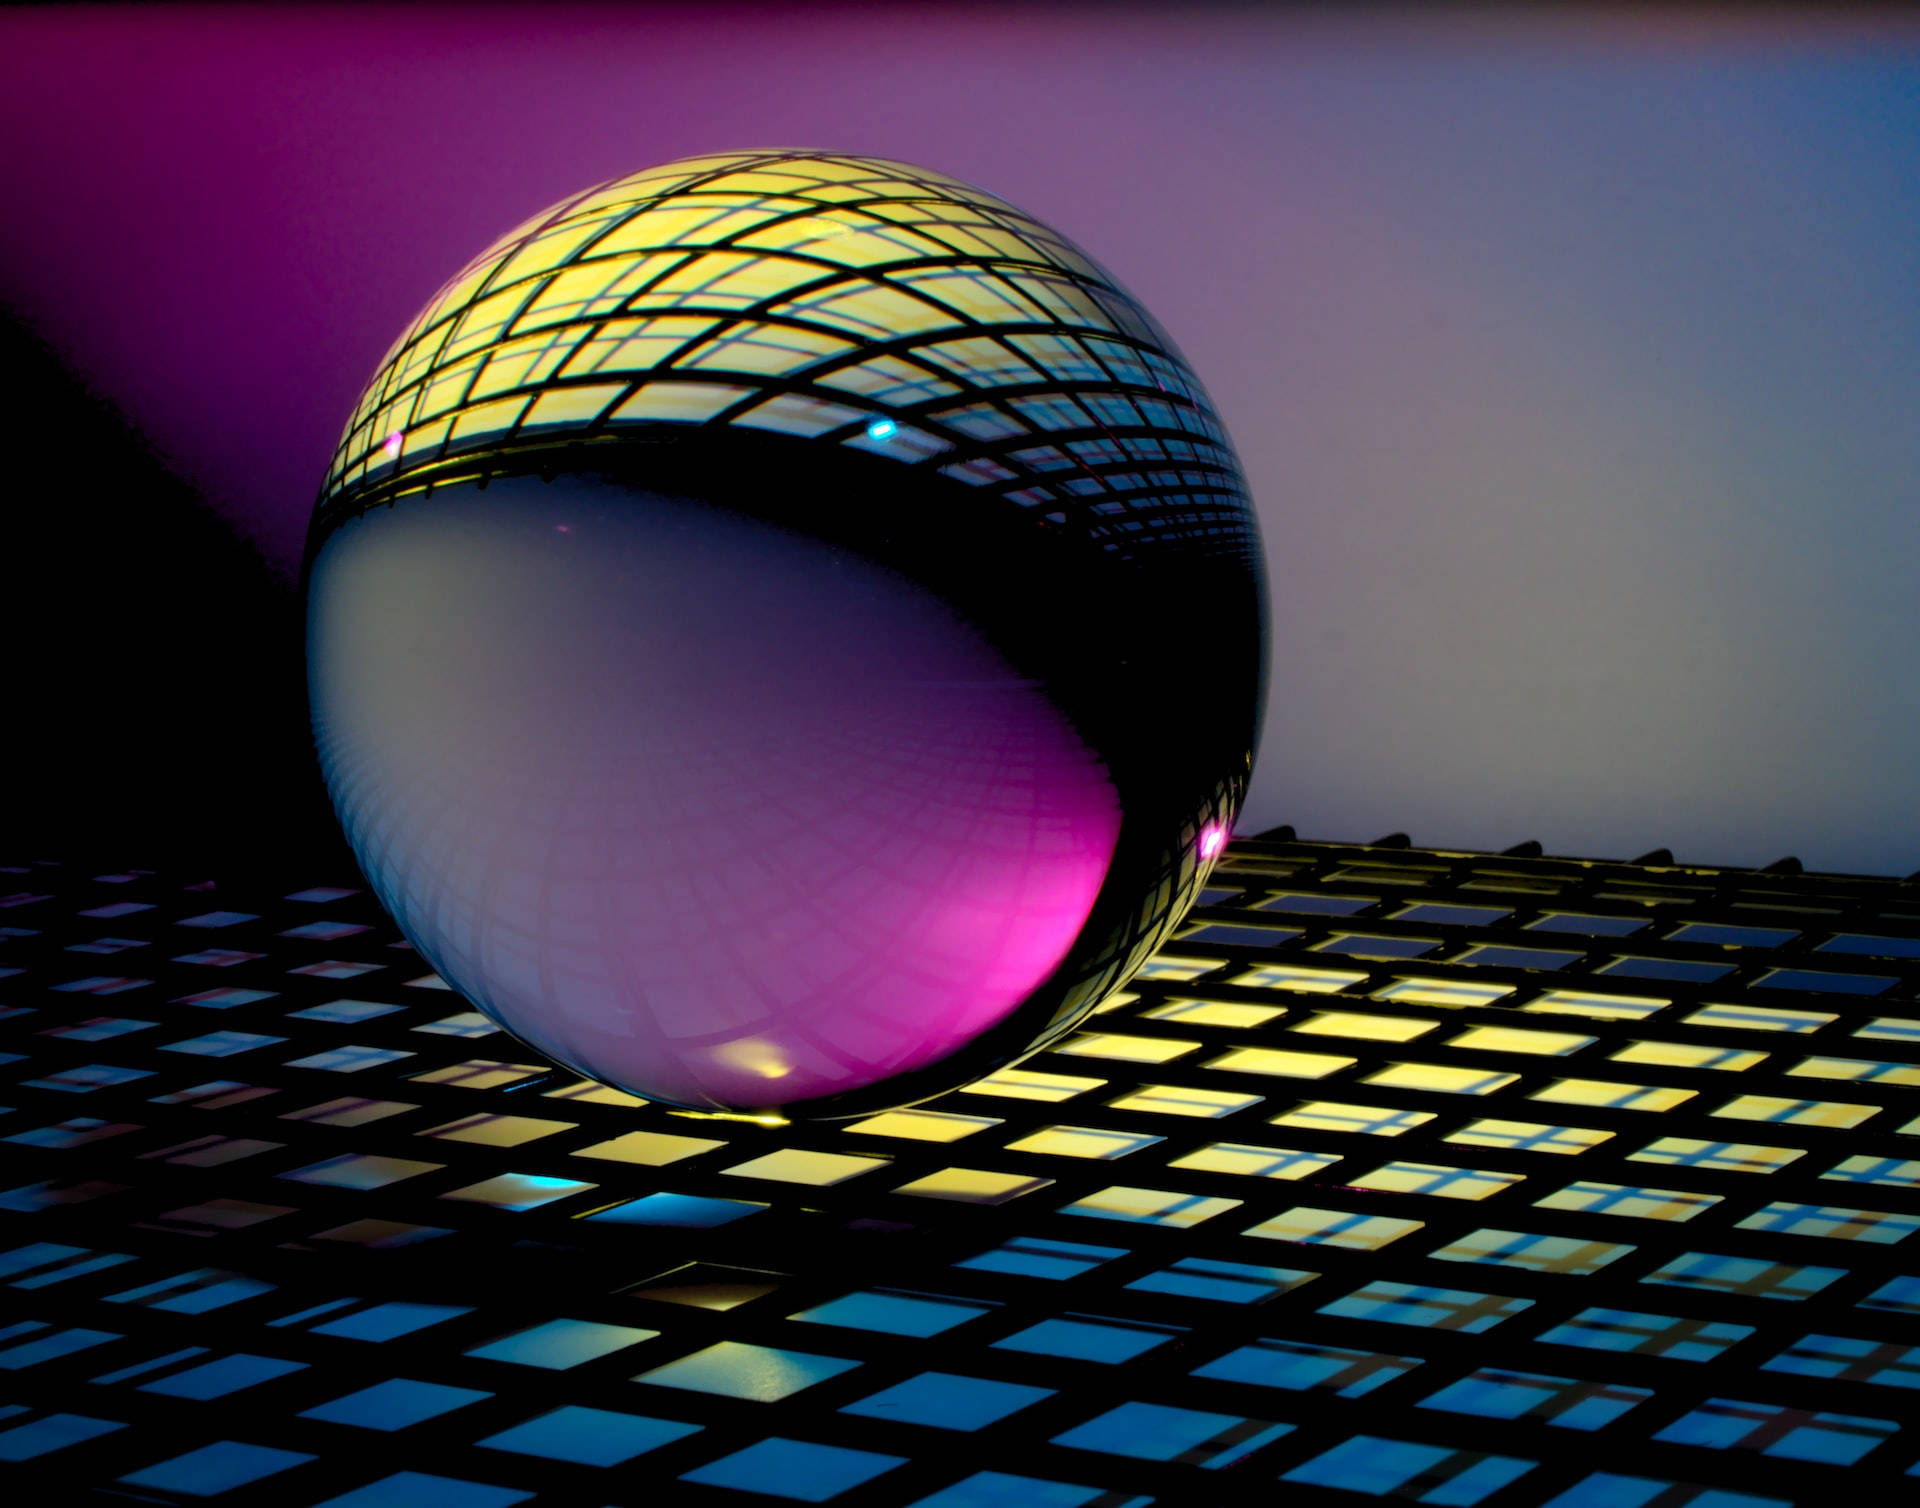 Mysterious Glass Orb on a Blue Checkered Background Wallpaper